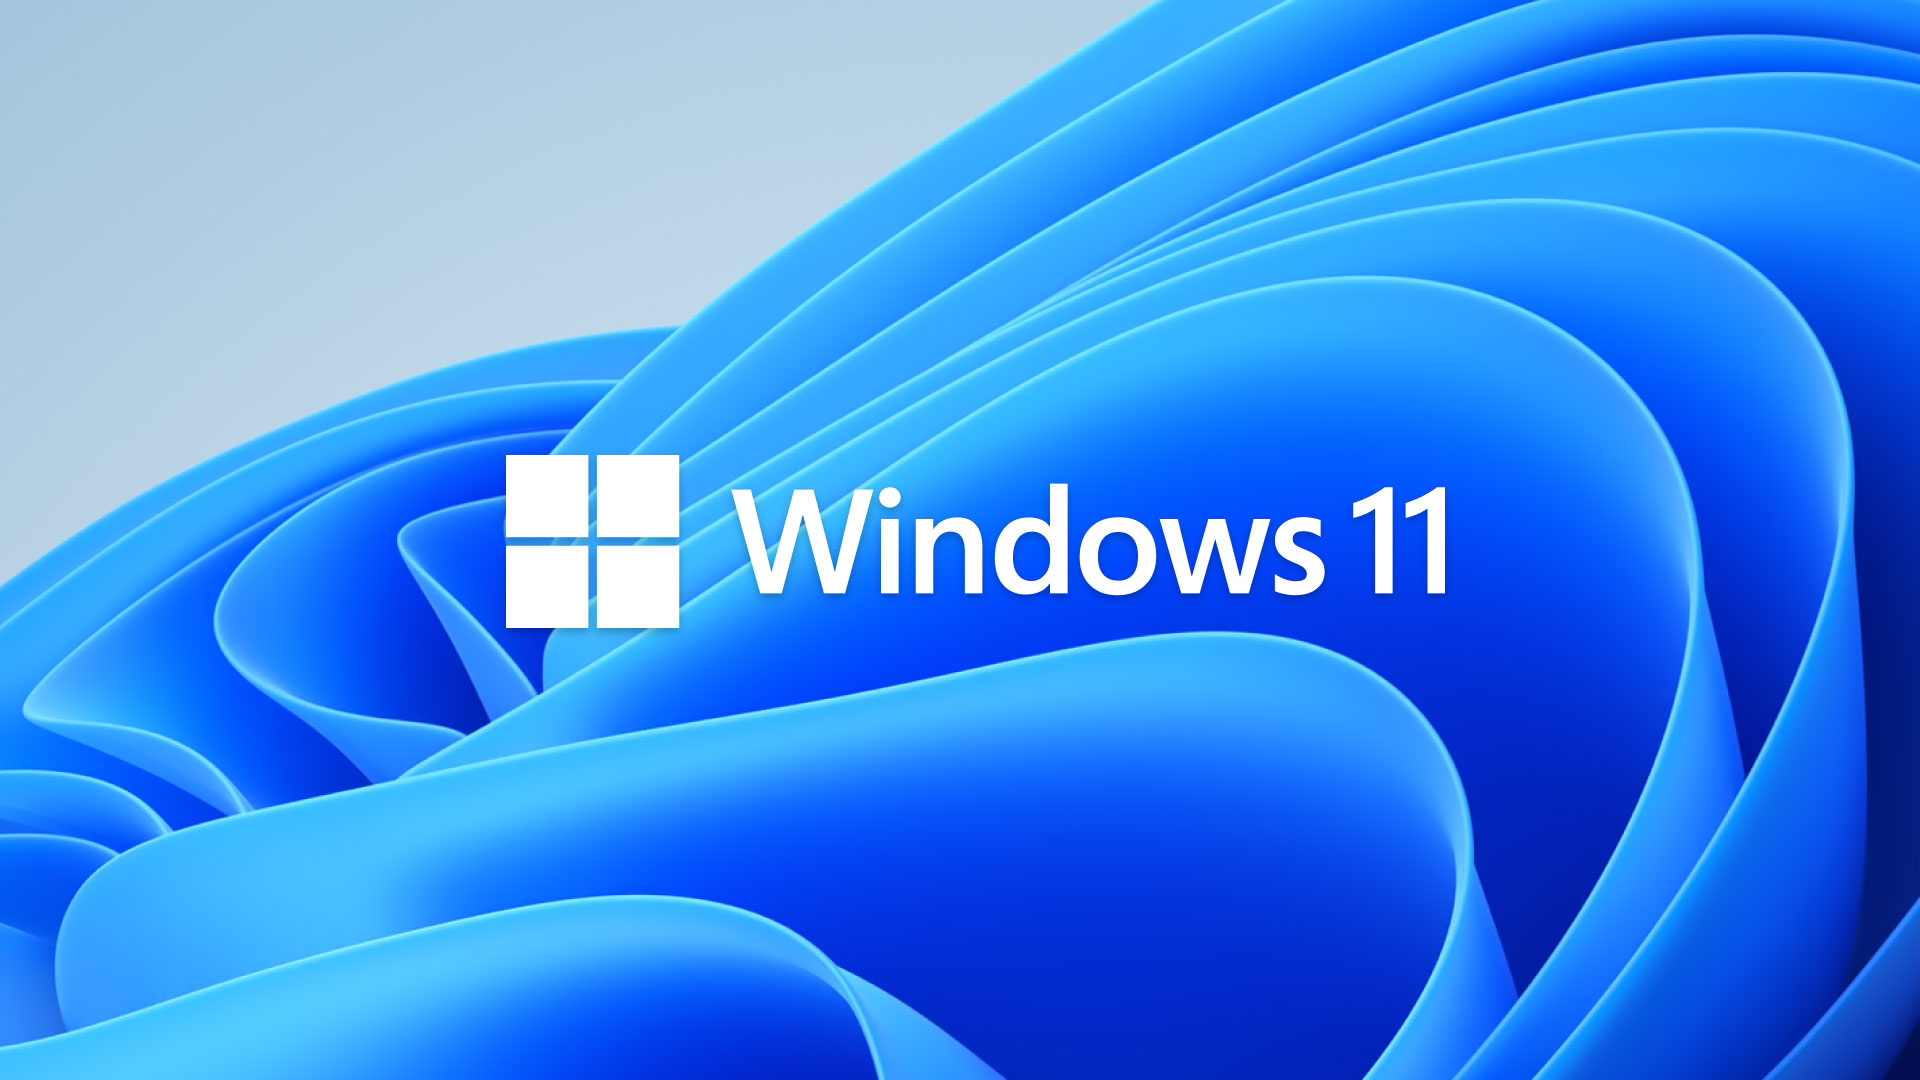 Microsoft releases free Windows 11 virtual machines with the Moment 3 Update